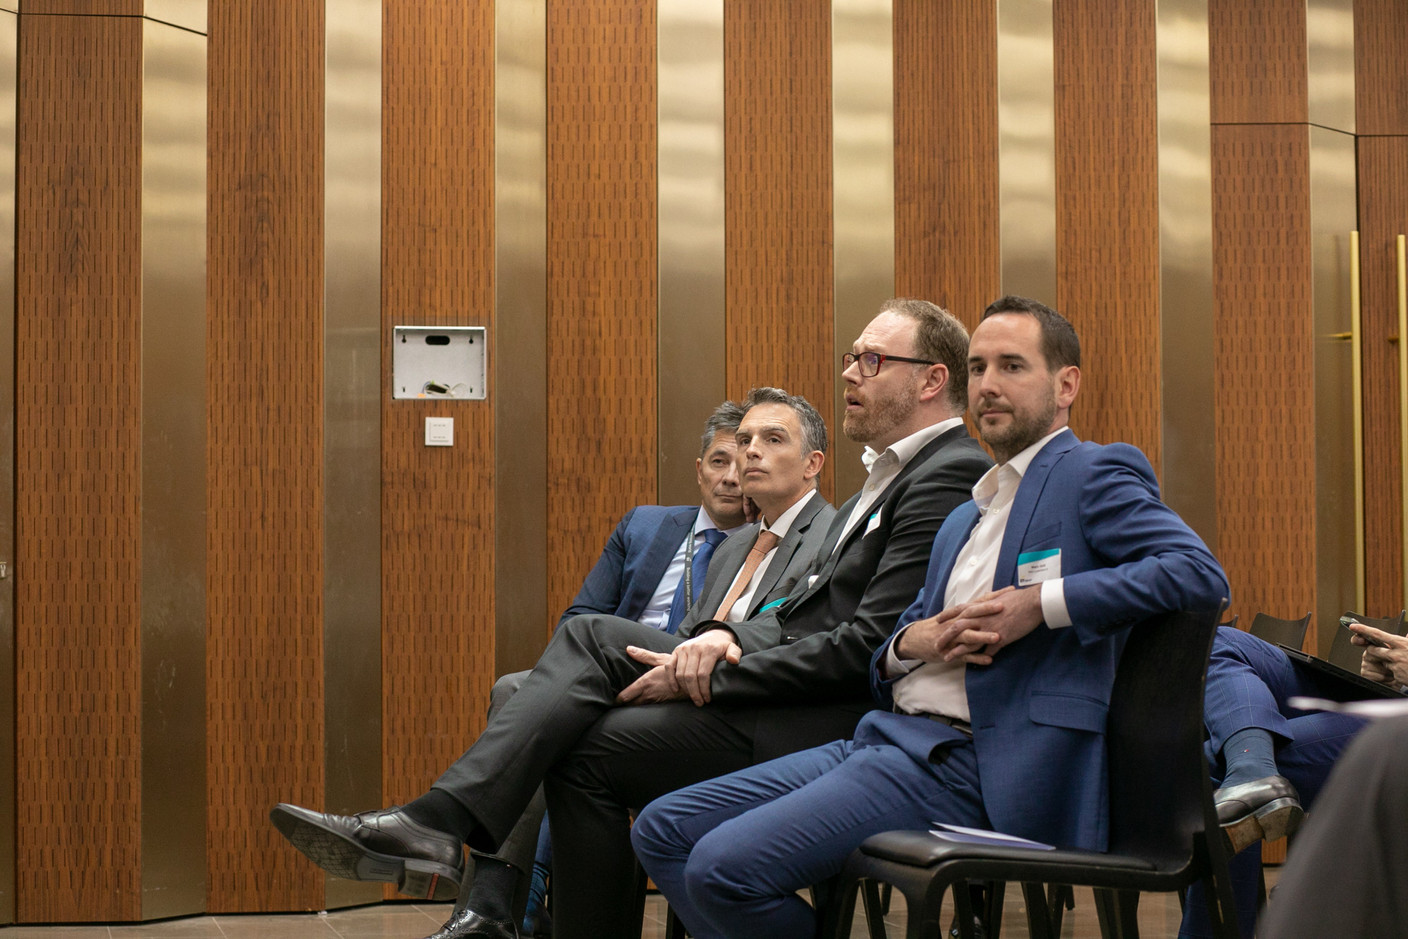 A roundtable talk with Luxembourg banking experts was held during an EY event last week. Photo: Matic Zorman / Maison Moderne